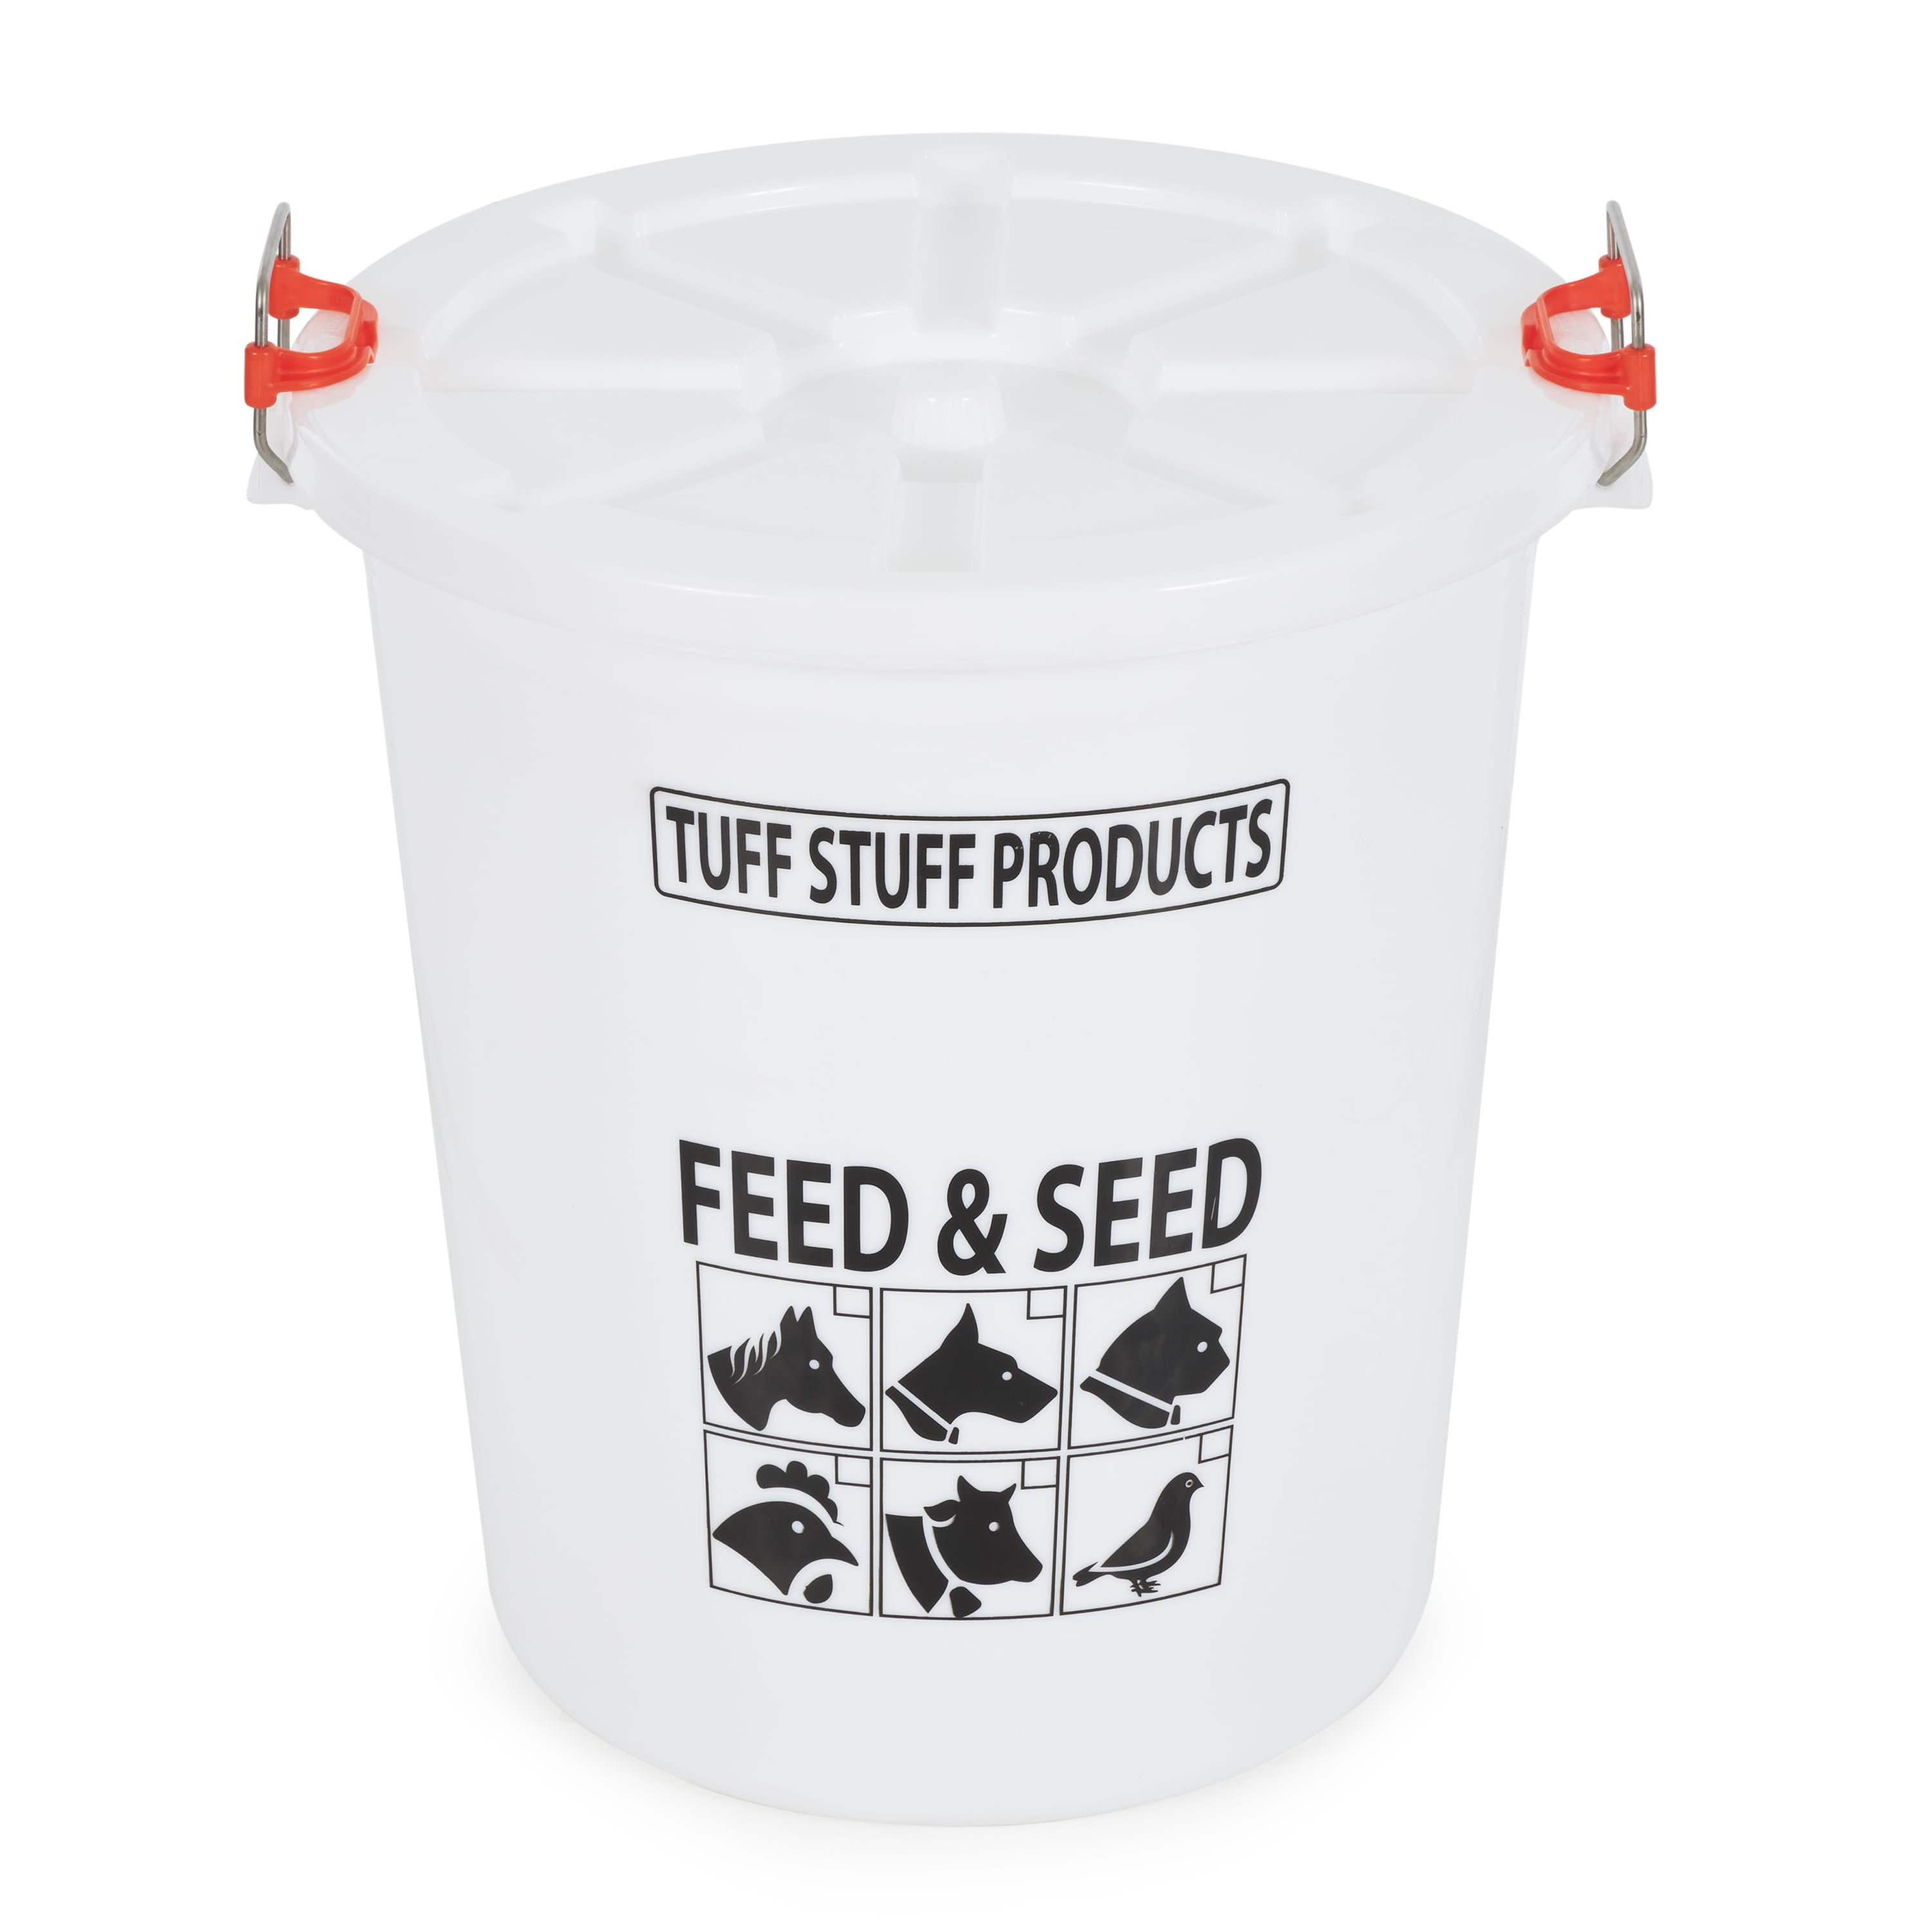 Locking Animal Containment Cap for 5-Gallon Buckets(Bucket Not Included)